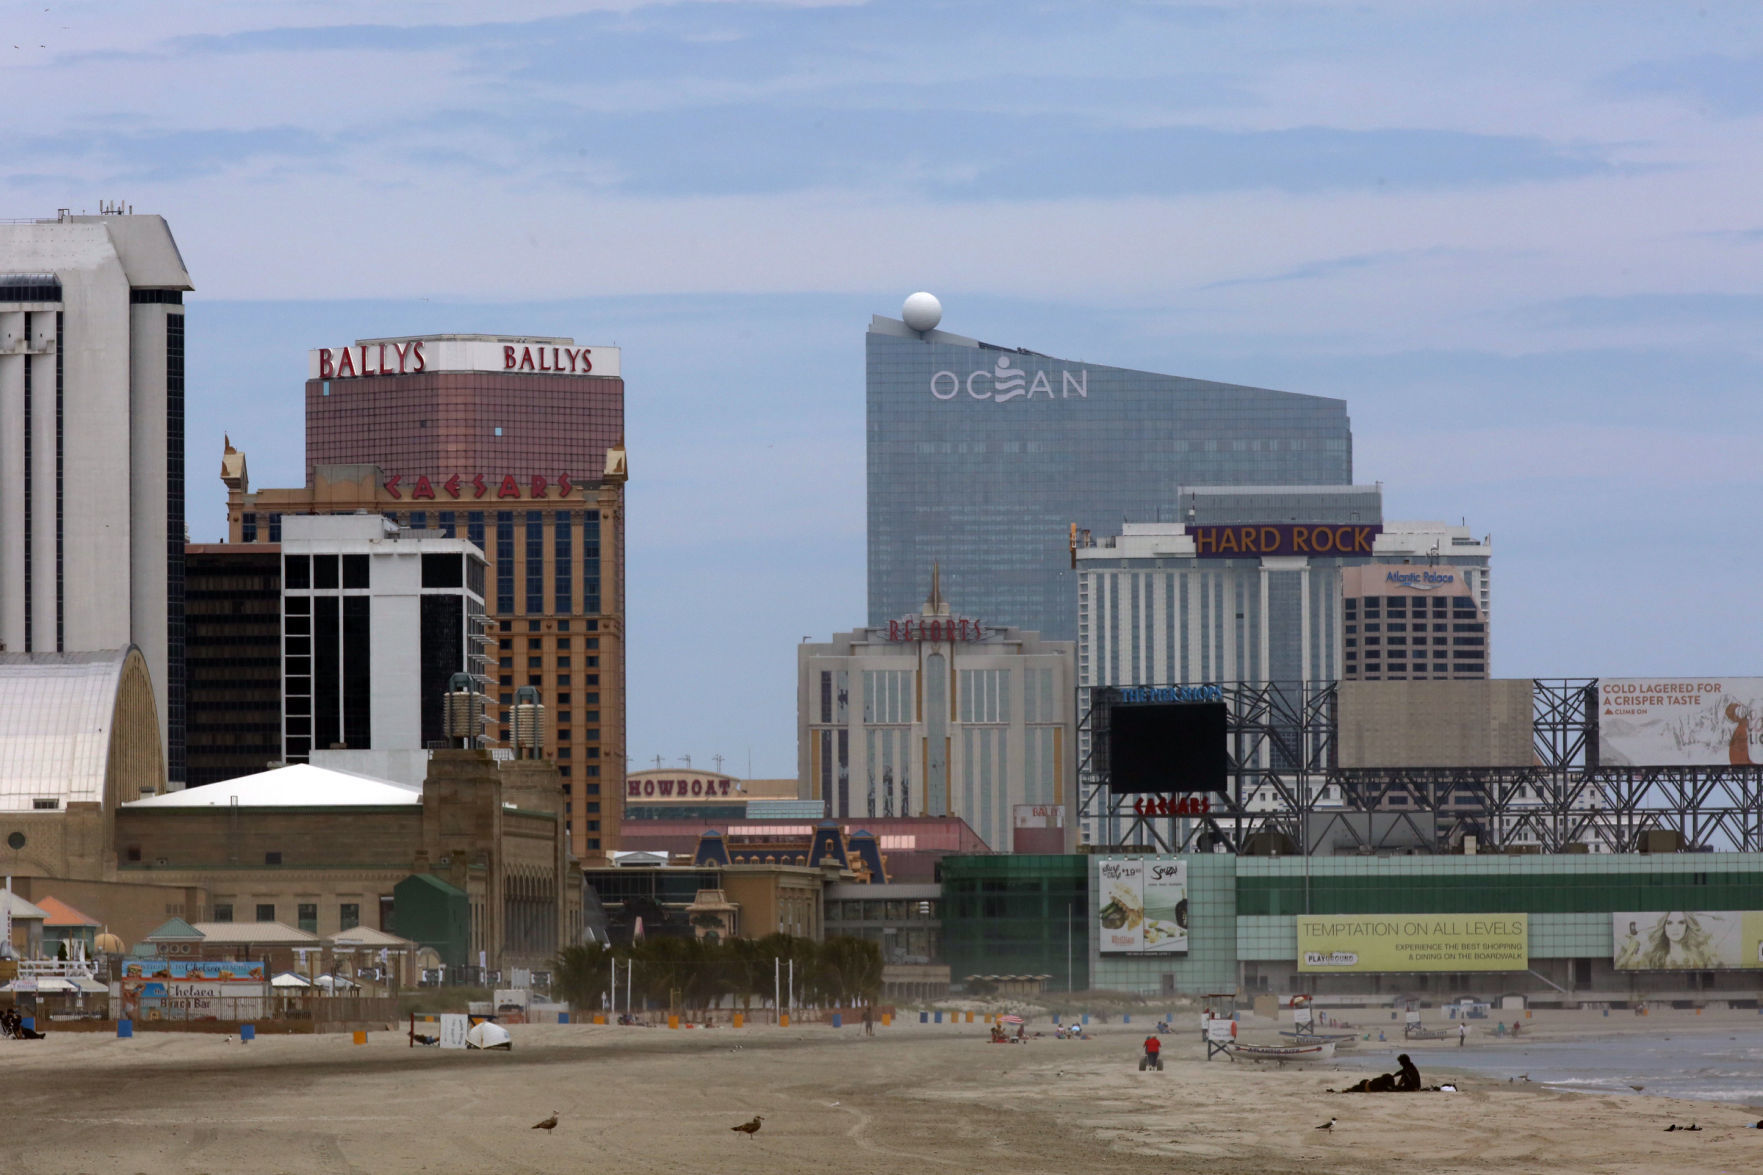 when did casinos become legal in atlantic city